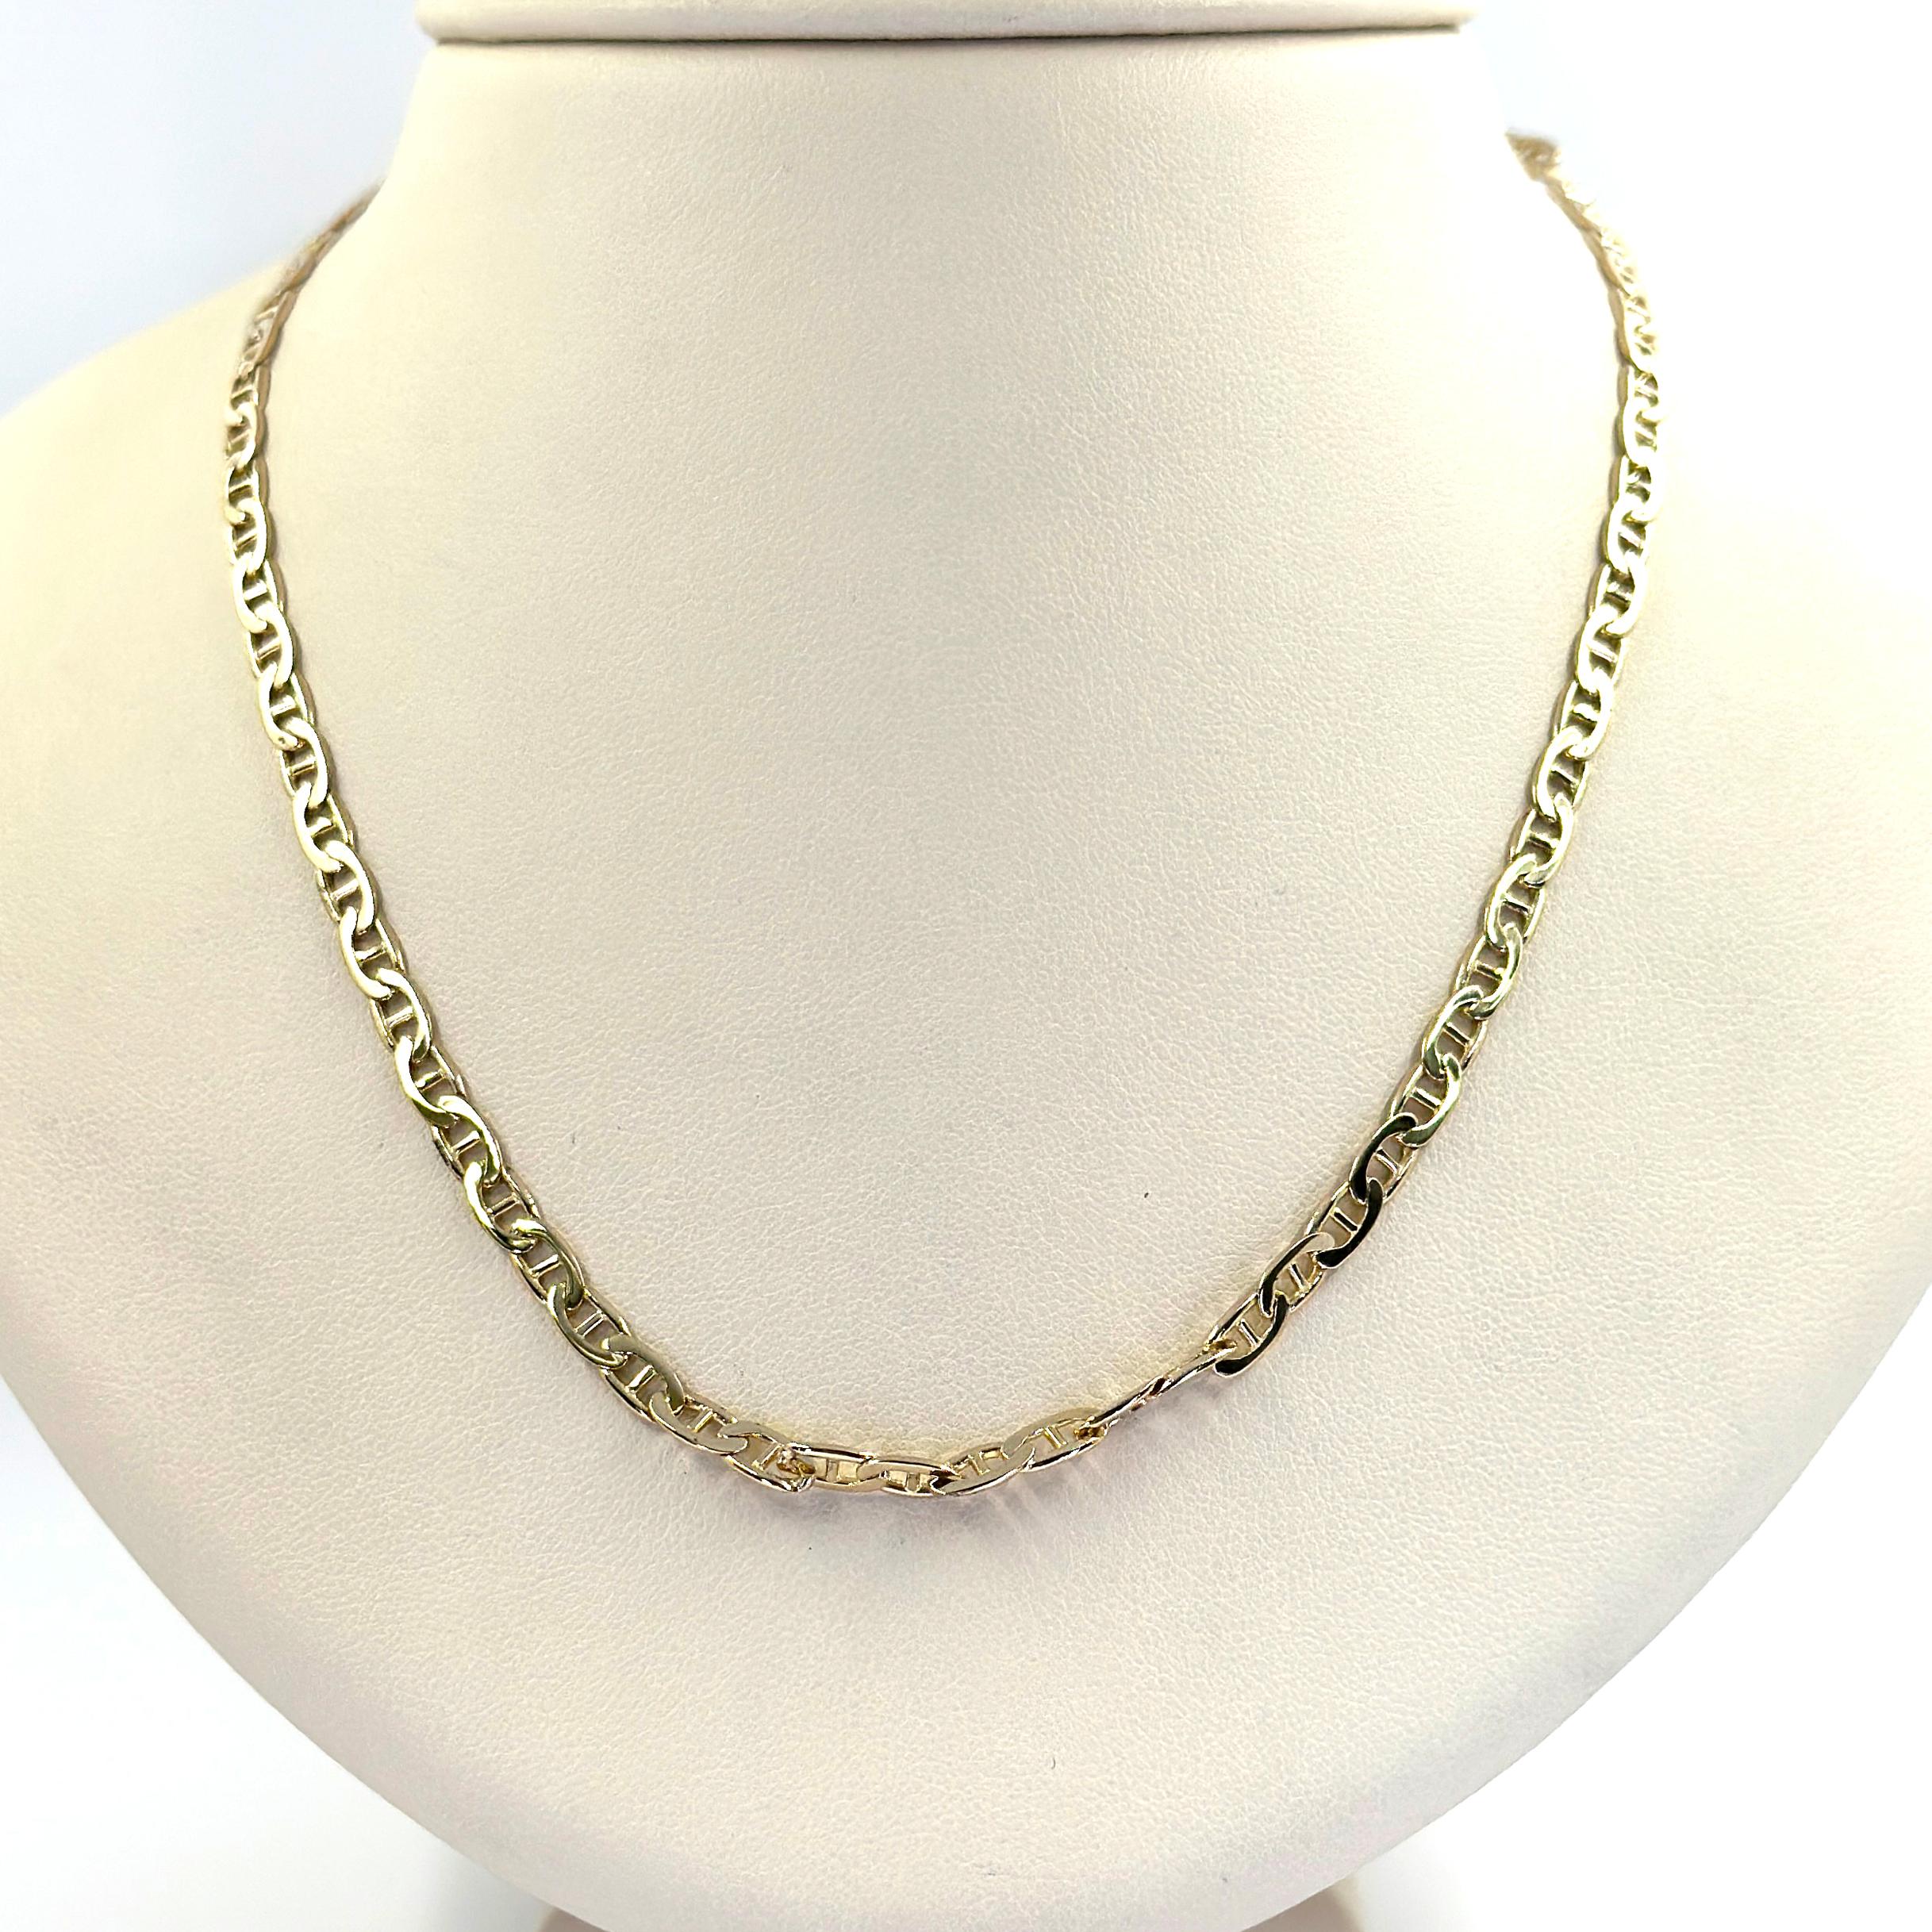 14 Karat Yellow Gold Anchor Chain Measuring 3.8mm Wide and 20 Inches Long with Lobster Clasp. Made in Italy. Finished Weight is 14.5 Grams.